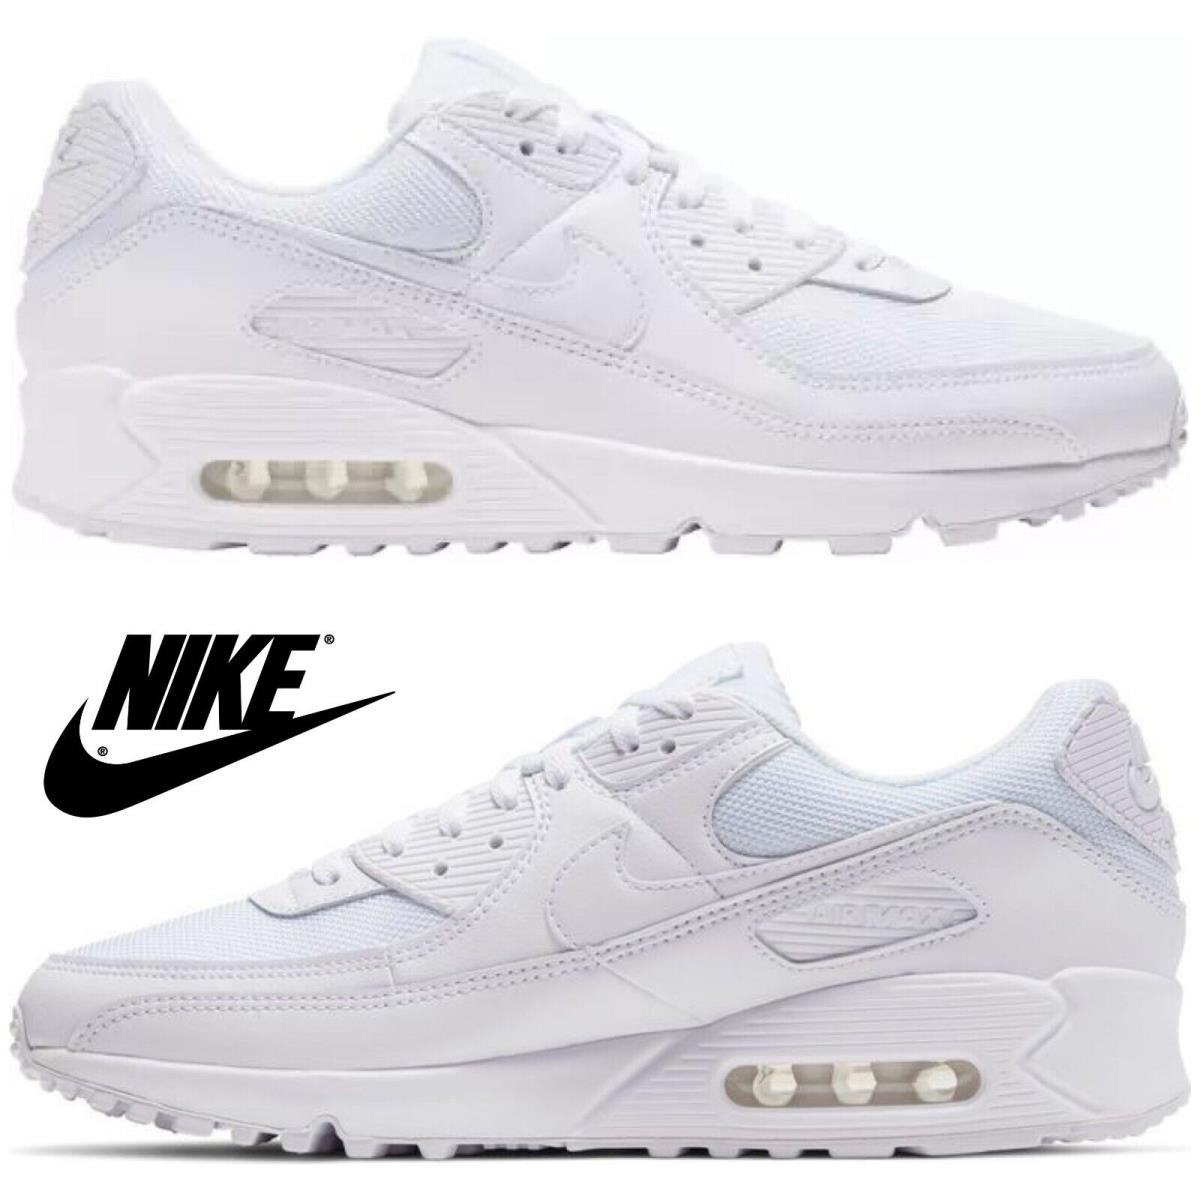 Nike Air Max 90 Casual Men`s Sneakers Running Athletic Sport Comfort Shoes White